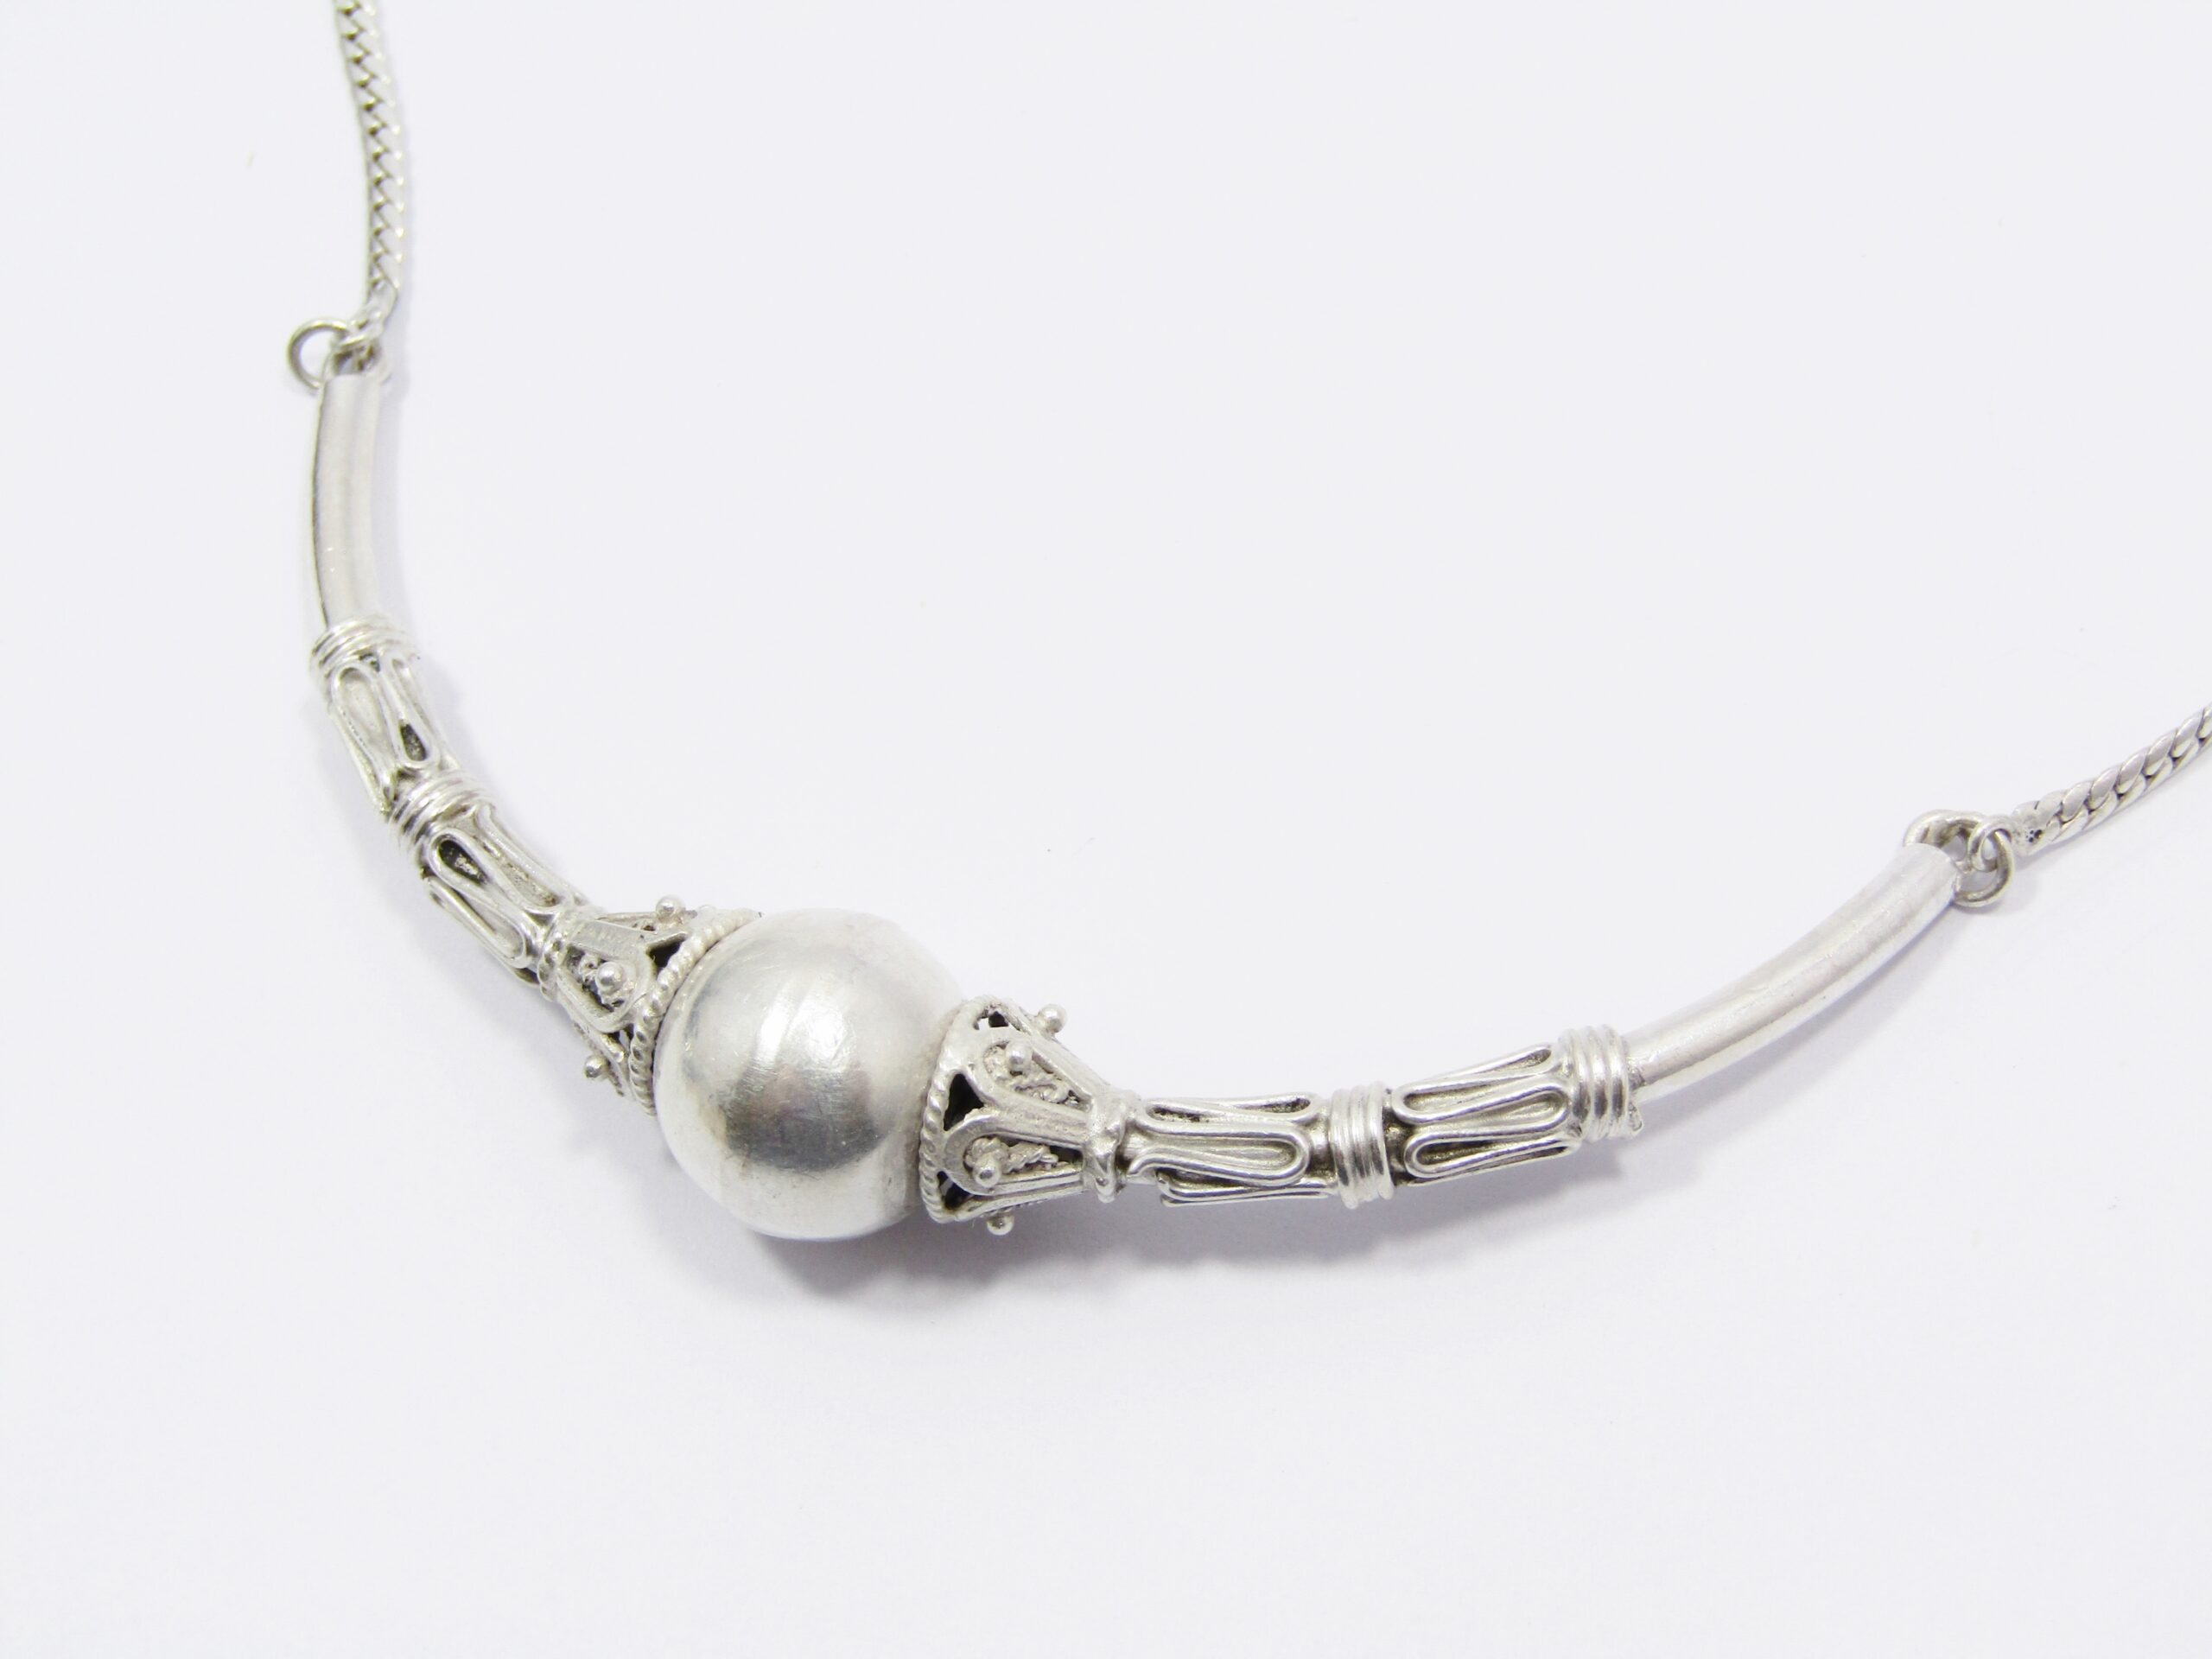 A Gorgeous Tibetan Design Necklace in Sterling Silver.